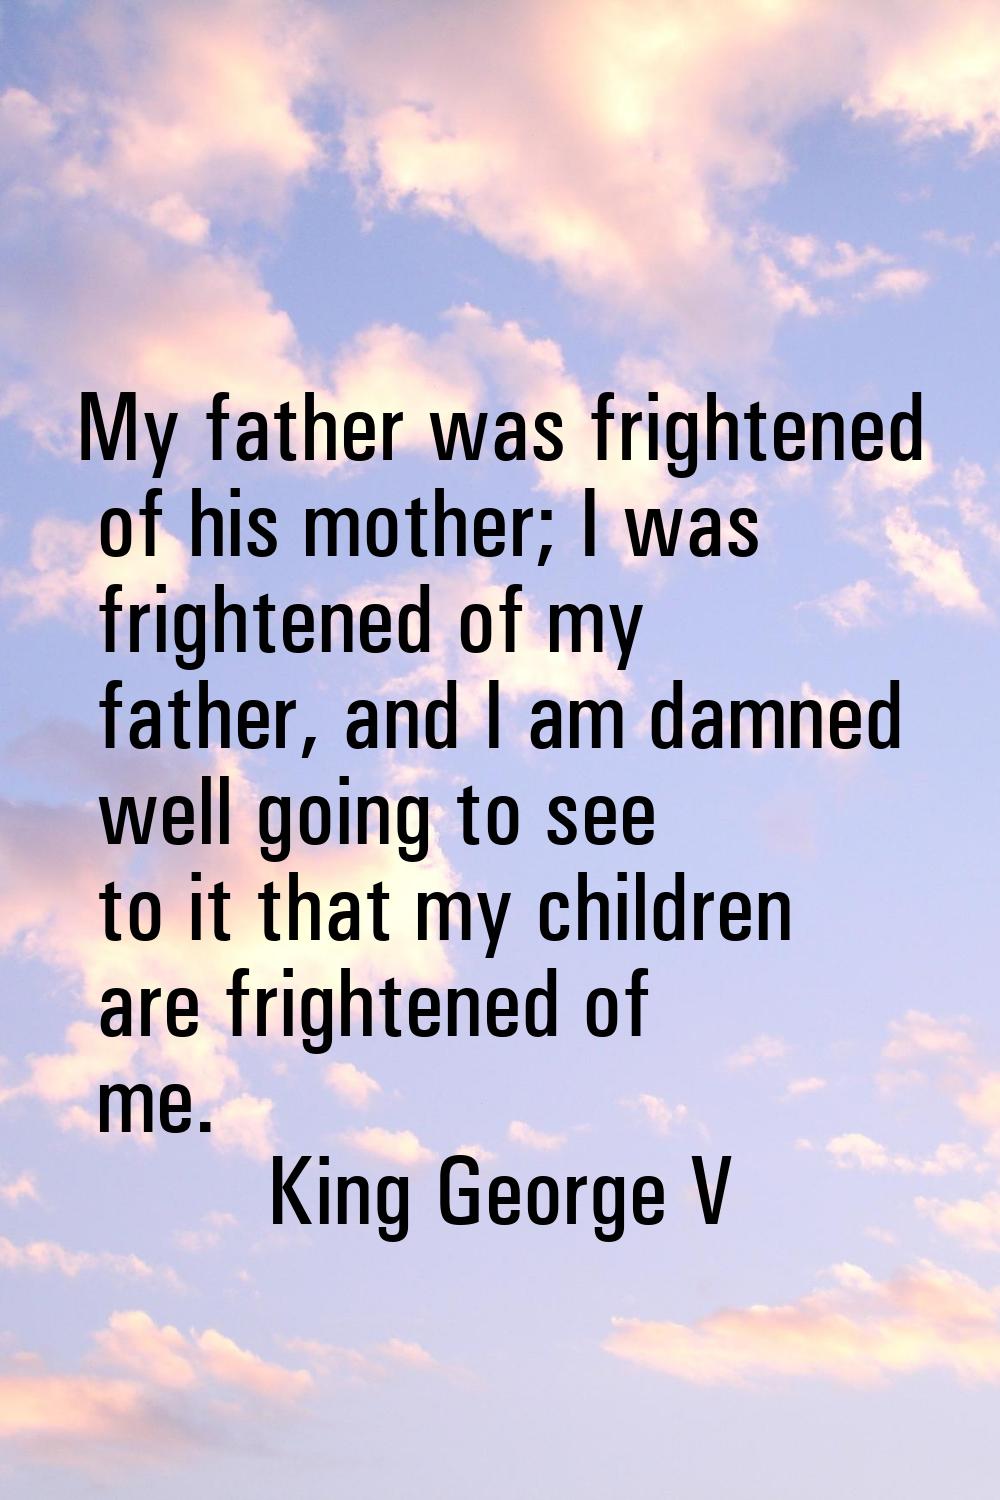 My father was frightened of his mother; I was frightened of my father, and I am damned well going t